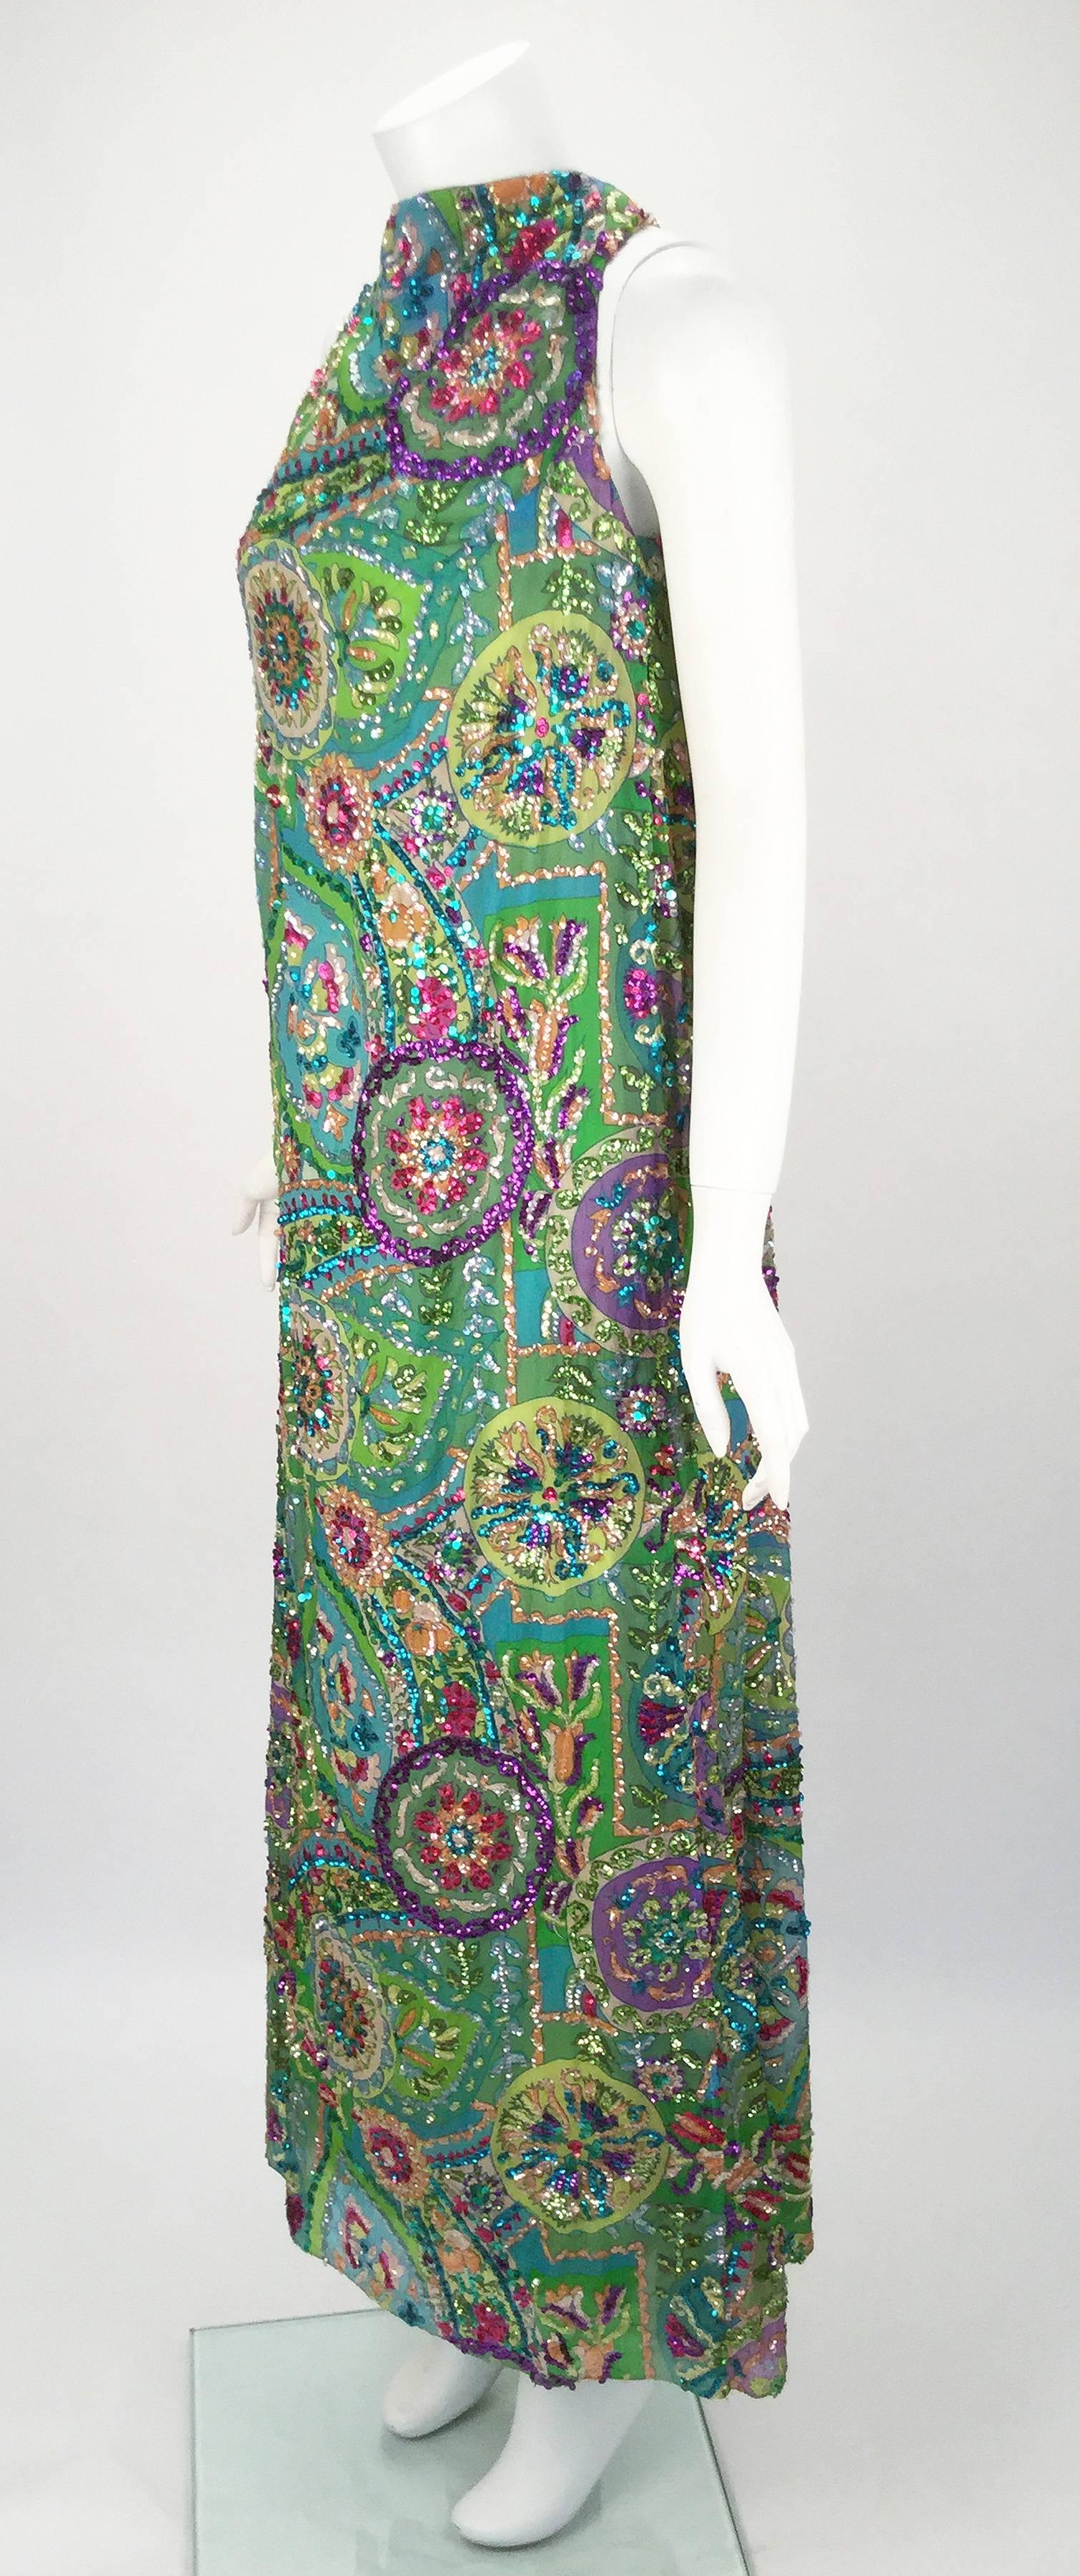 Absolutely fantastic heavily beaded maxi dress from Sara Fredericks. The dress is covered in jewel tone and iridescent sequins over an interesting print with several mandalas. Gathered from the high neck the dress falls like a waterfall of pleats to